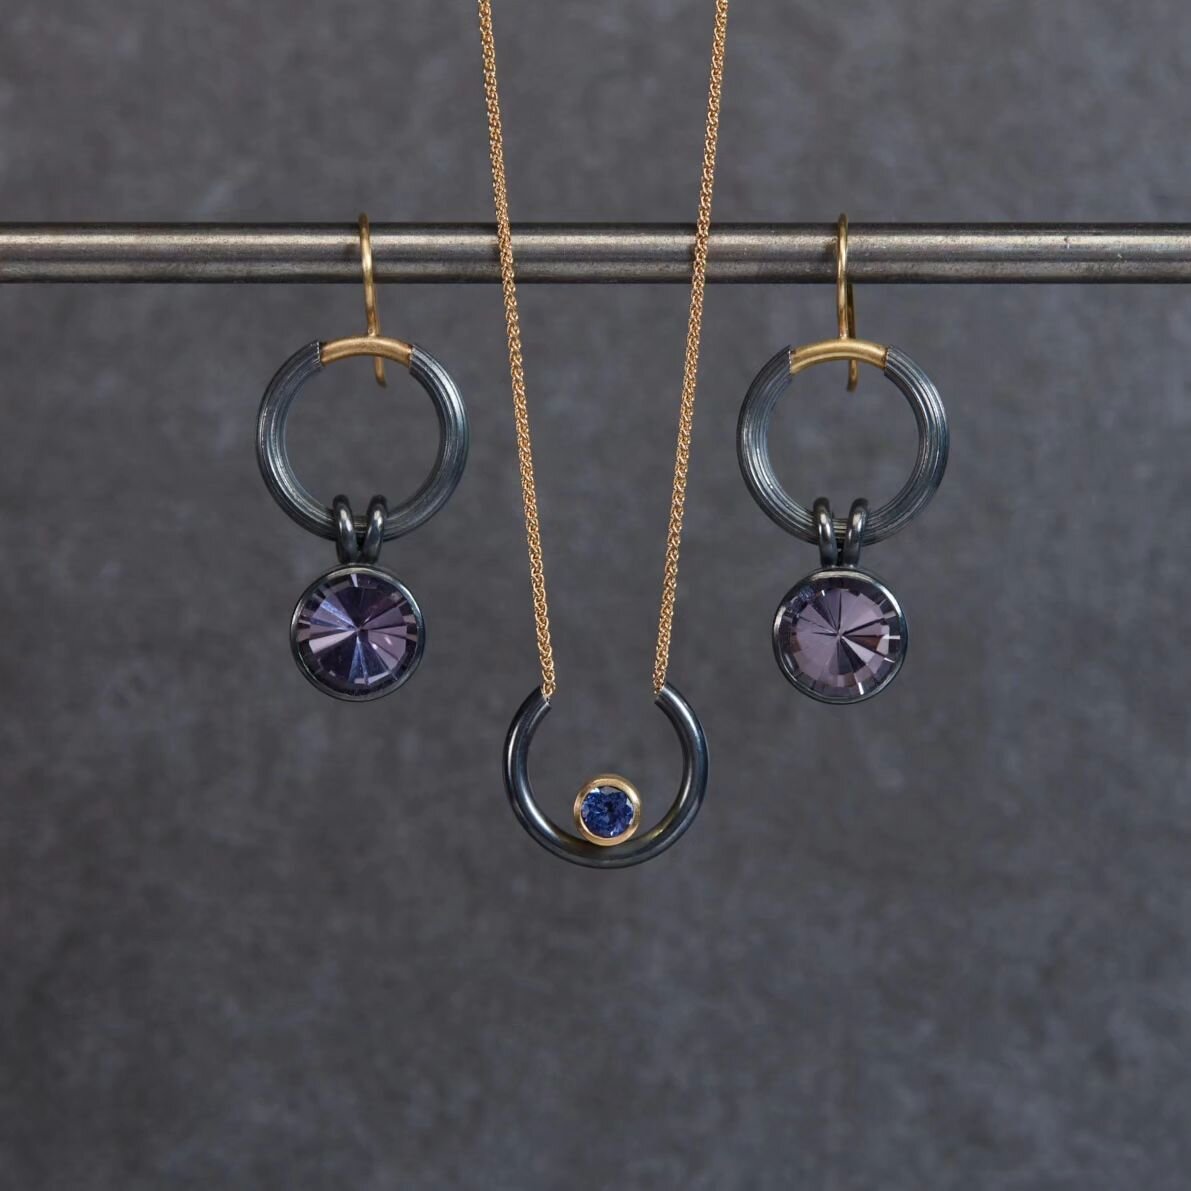 This weeks line-up is full of mauve and violet hues. Crisply faceted Pink Amethyst in the earrings and deep, vibrant violet Tanzanite in the pendant. As ever, my favoured metals are darkly oxidised silver and rich yellow 18ct gold.⁠
⁠
Both pieces are